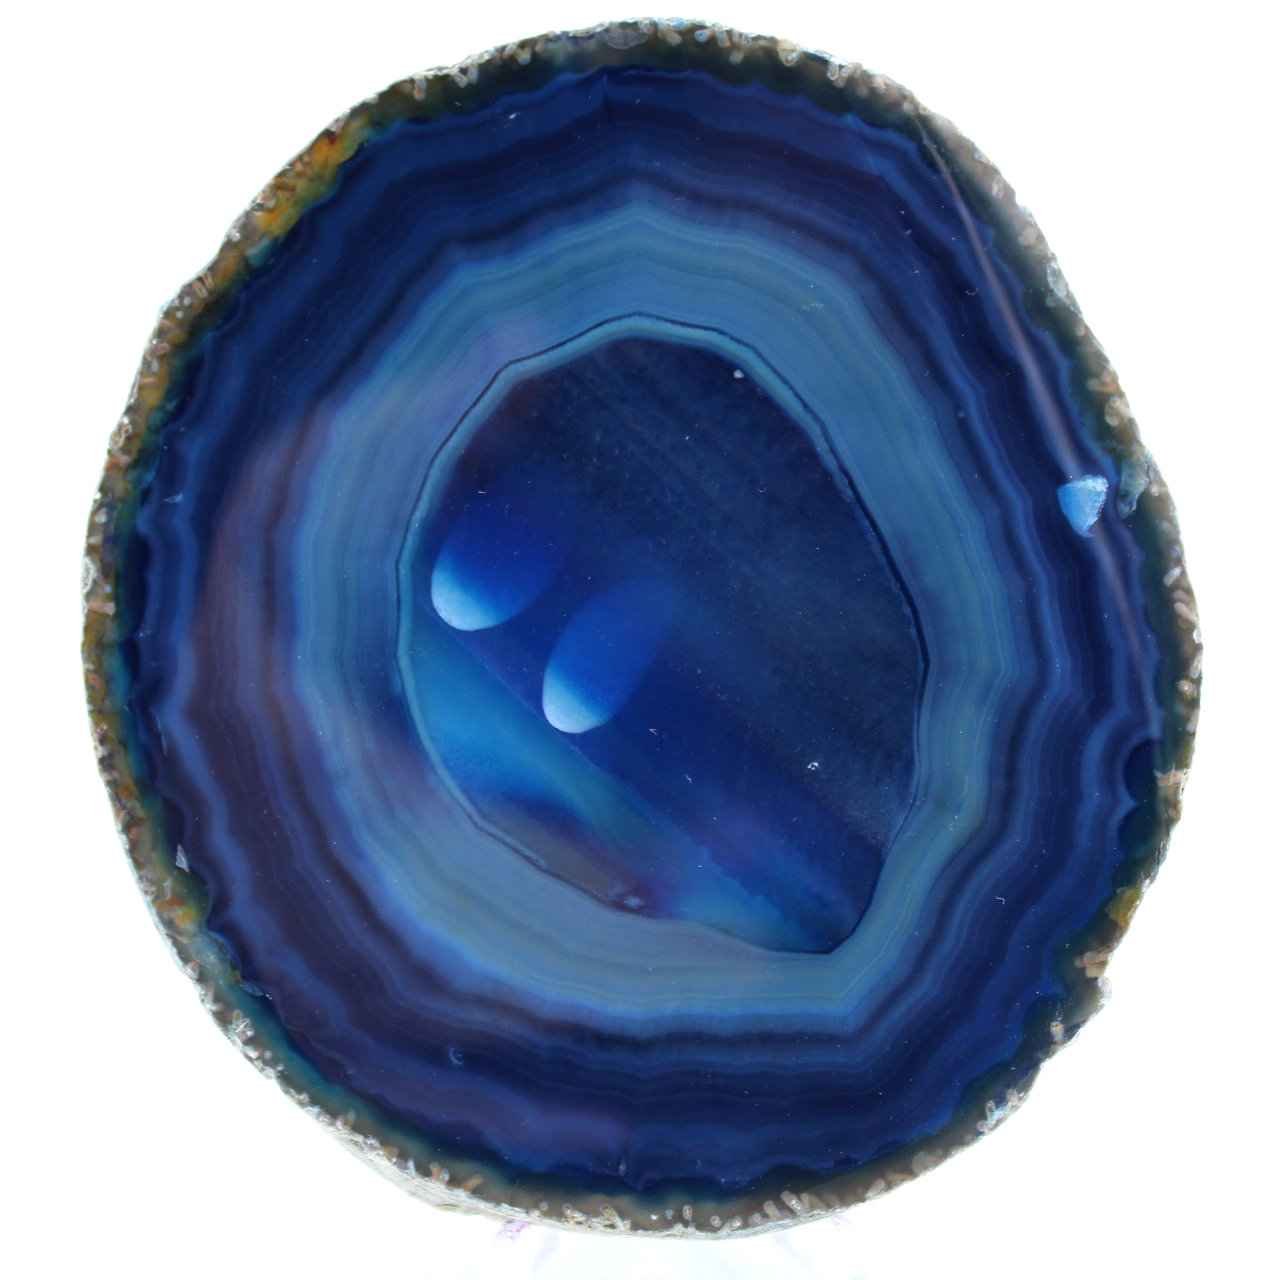 mineral blue agate